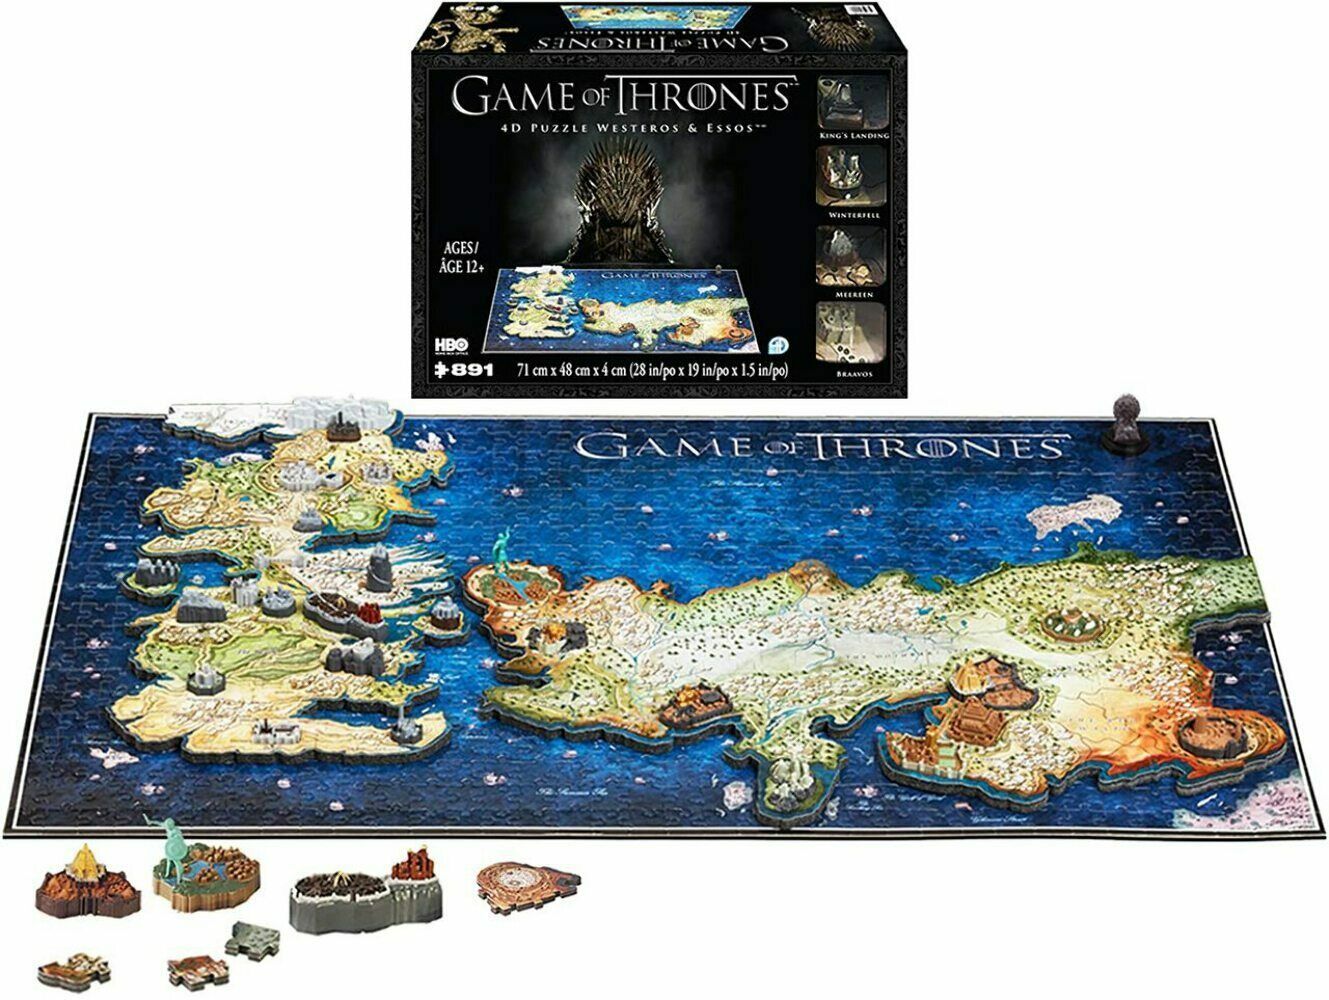 Primary image for Game of Thrones Westeros & Essos Map 3D Puzzle 4D Cityscapes 4D51005